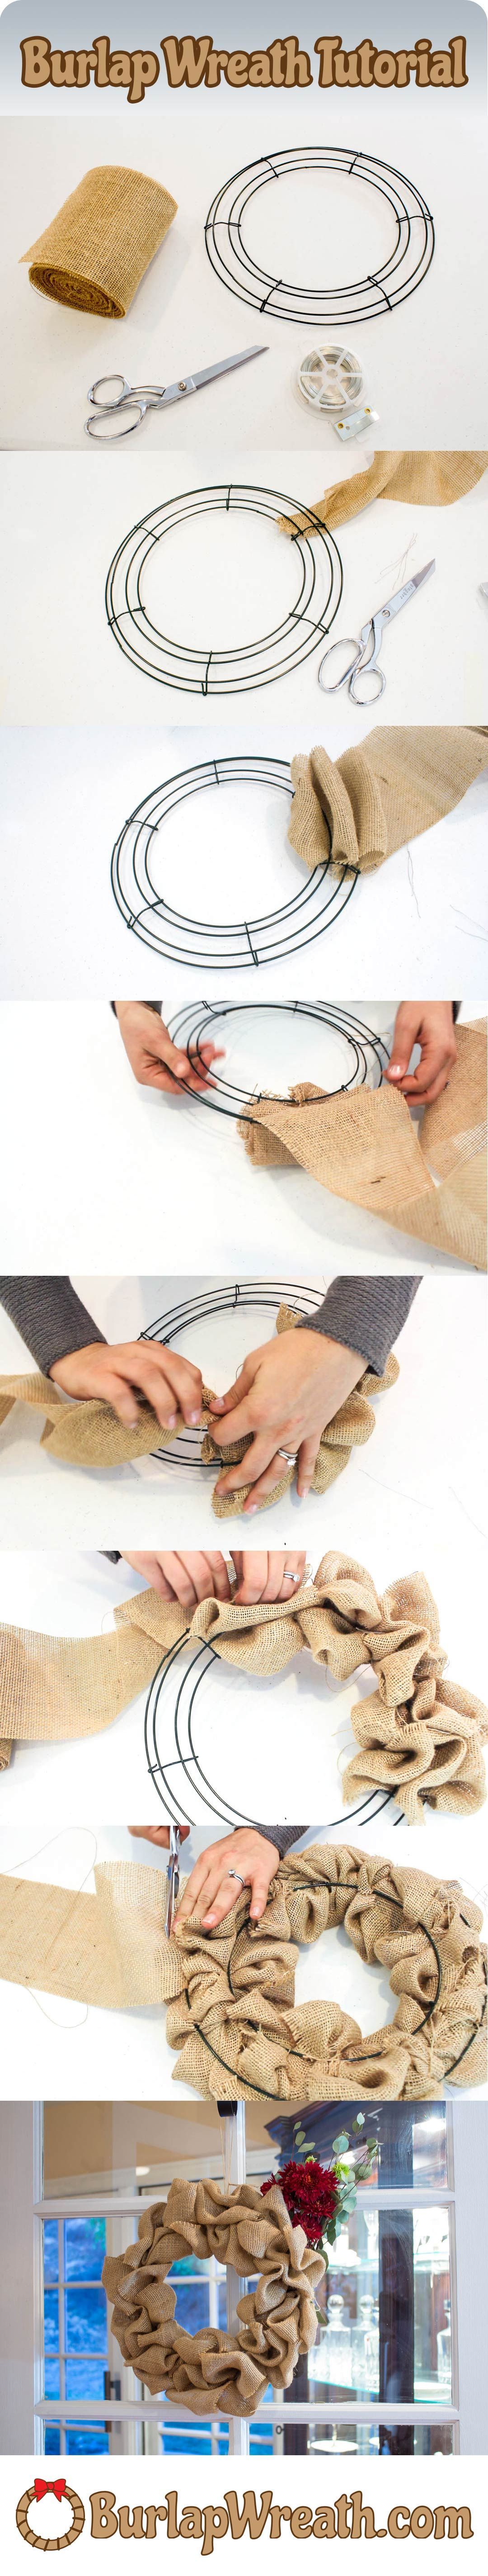 How to make a burlap wreath: Want to make a burlap wreath? Check out this easy to use tutorial showing you how to make a burlap wreath in less than 10 minutes. All you need is a wreath frame, 20-30